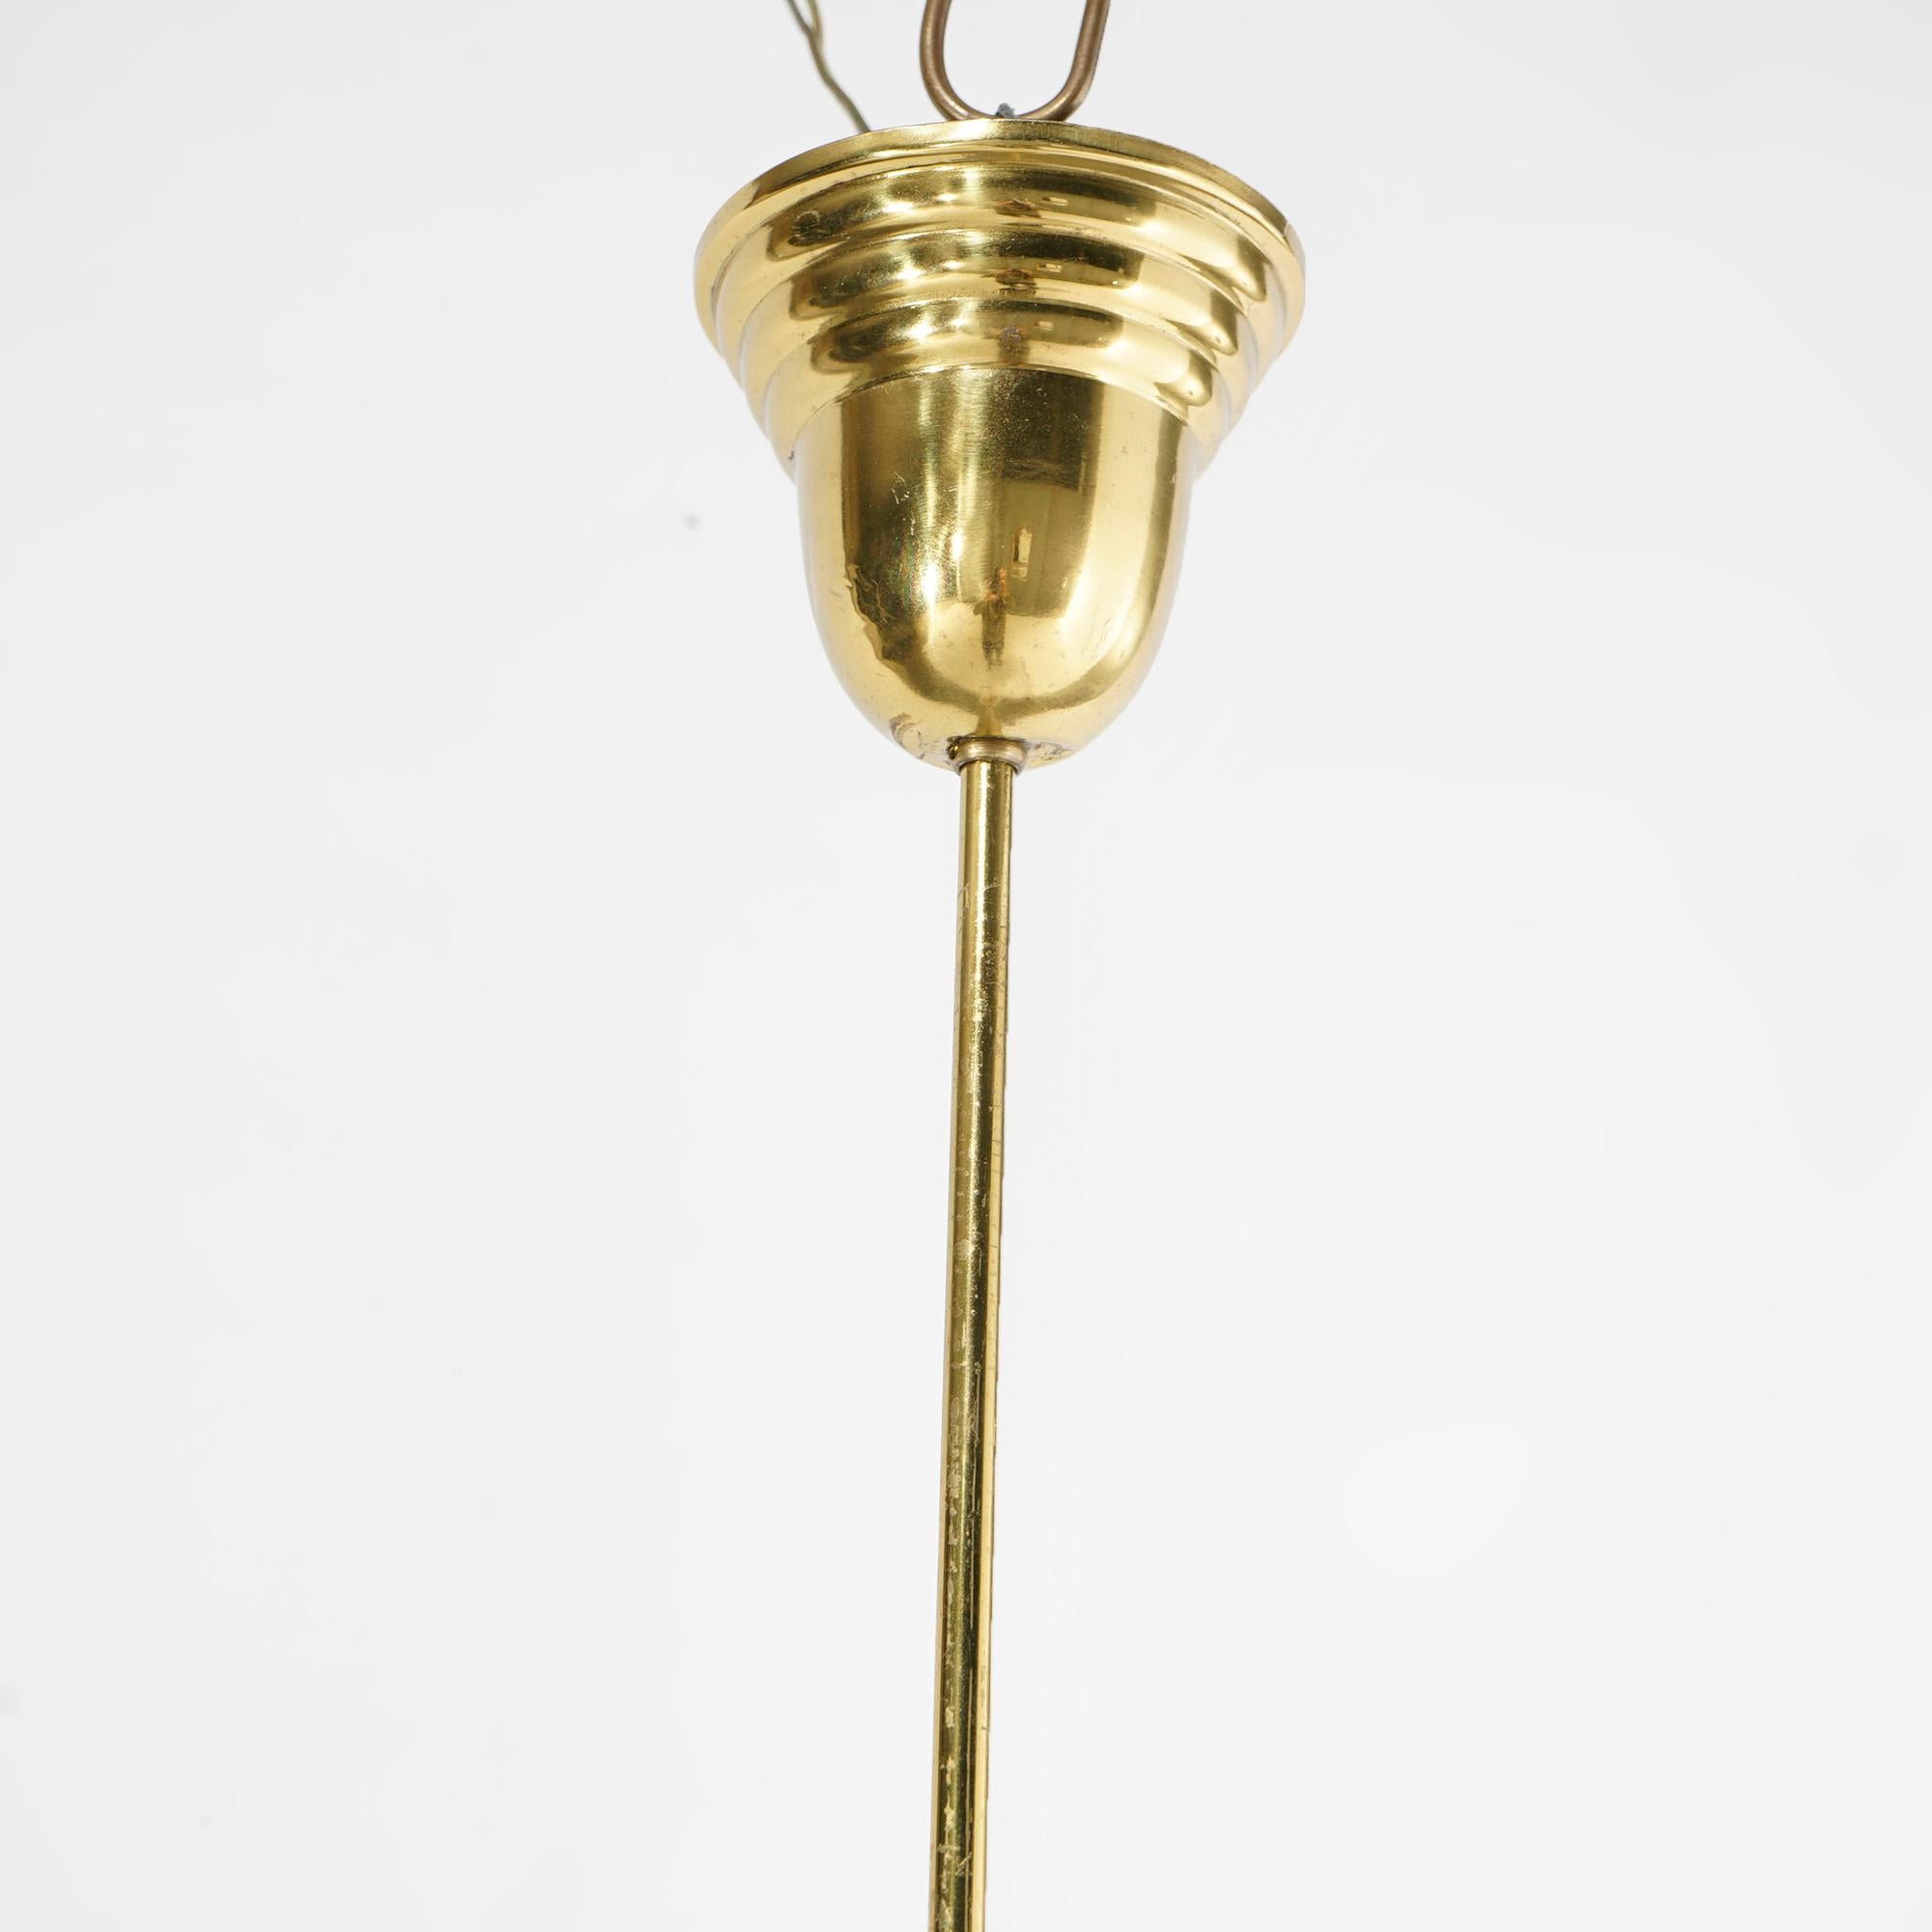 Antique Brass Hanging Hall Light Fixture Circa 1920 For Sale 4